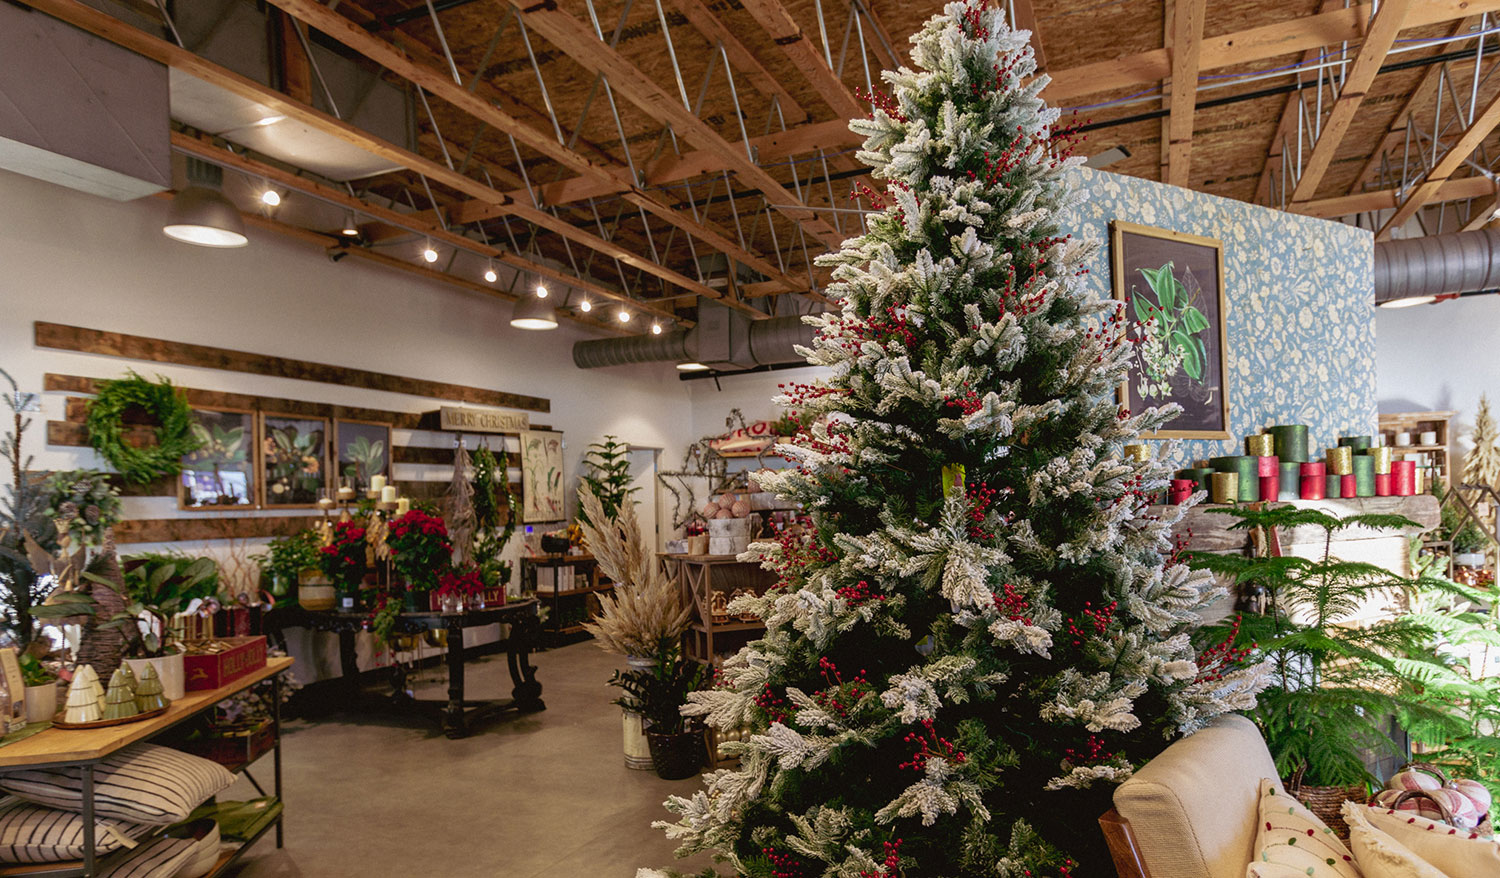 Home decor higlight banner. Image of Franz Witte garden center during the holidays.